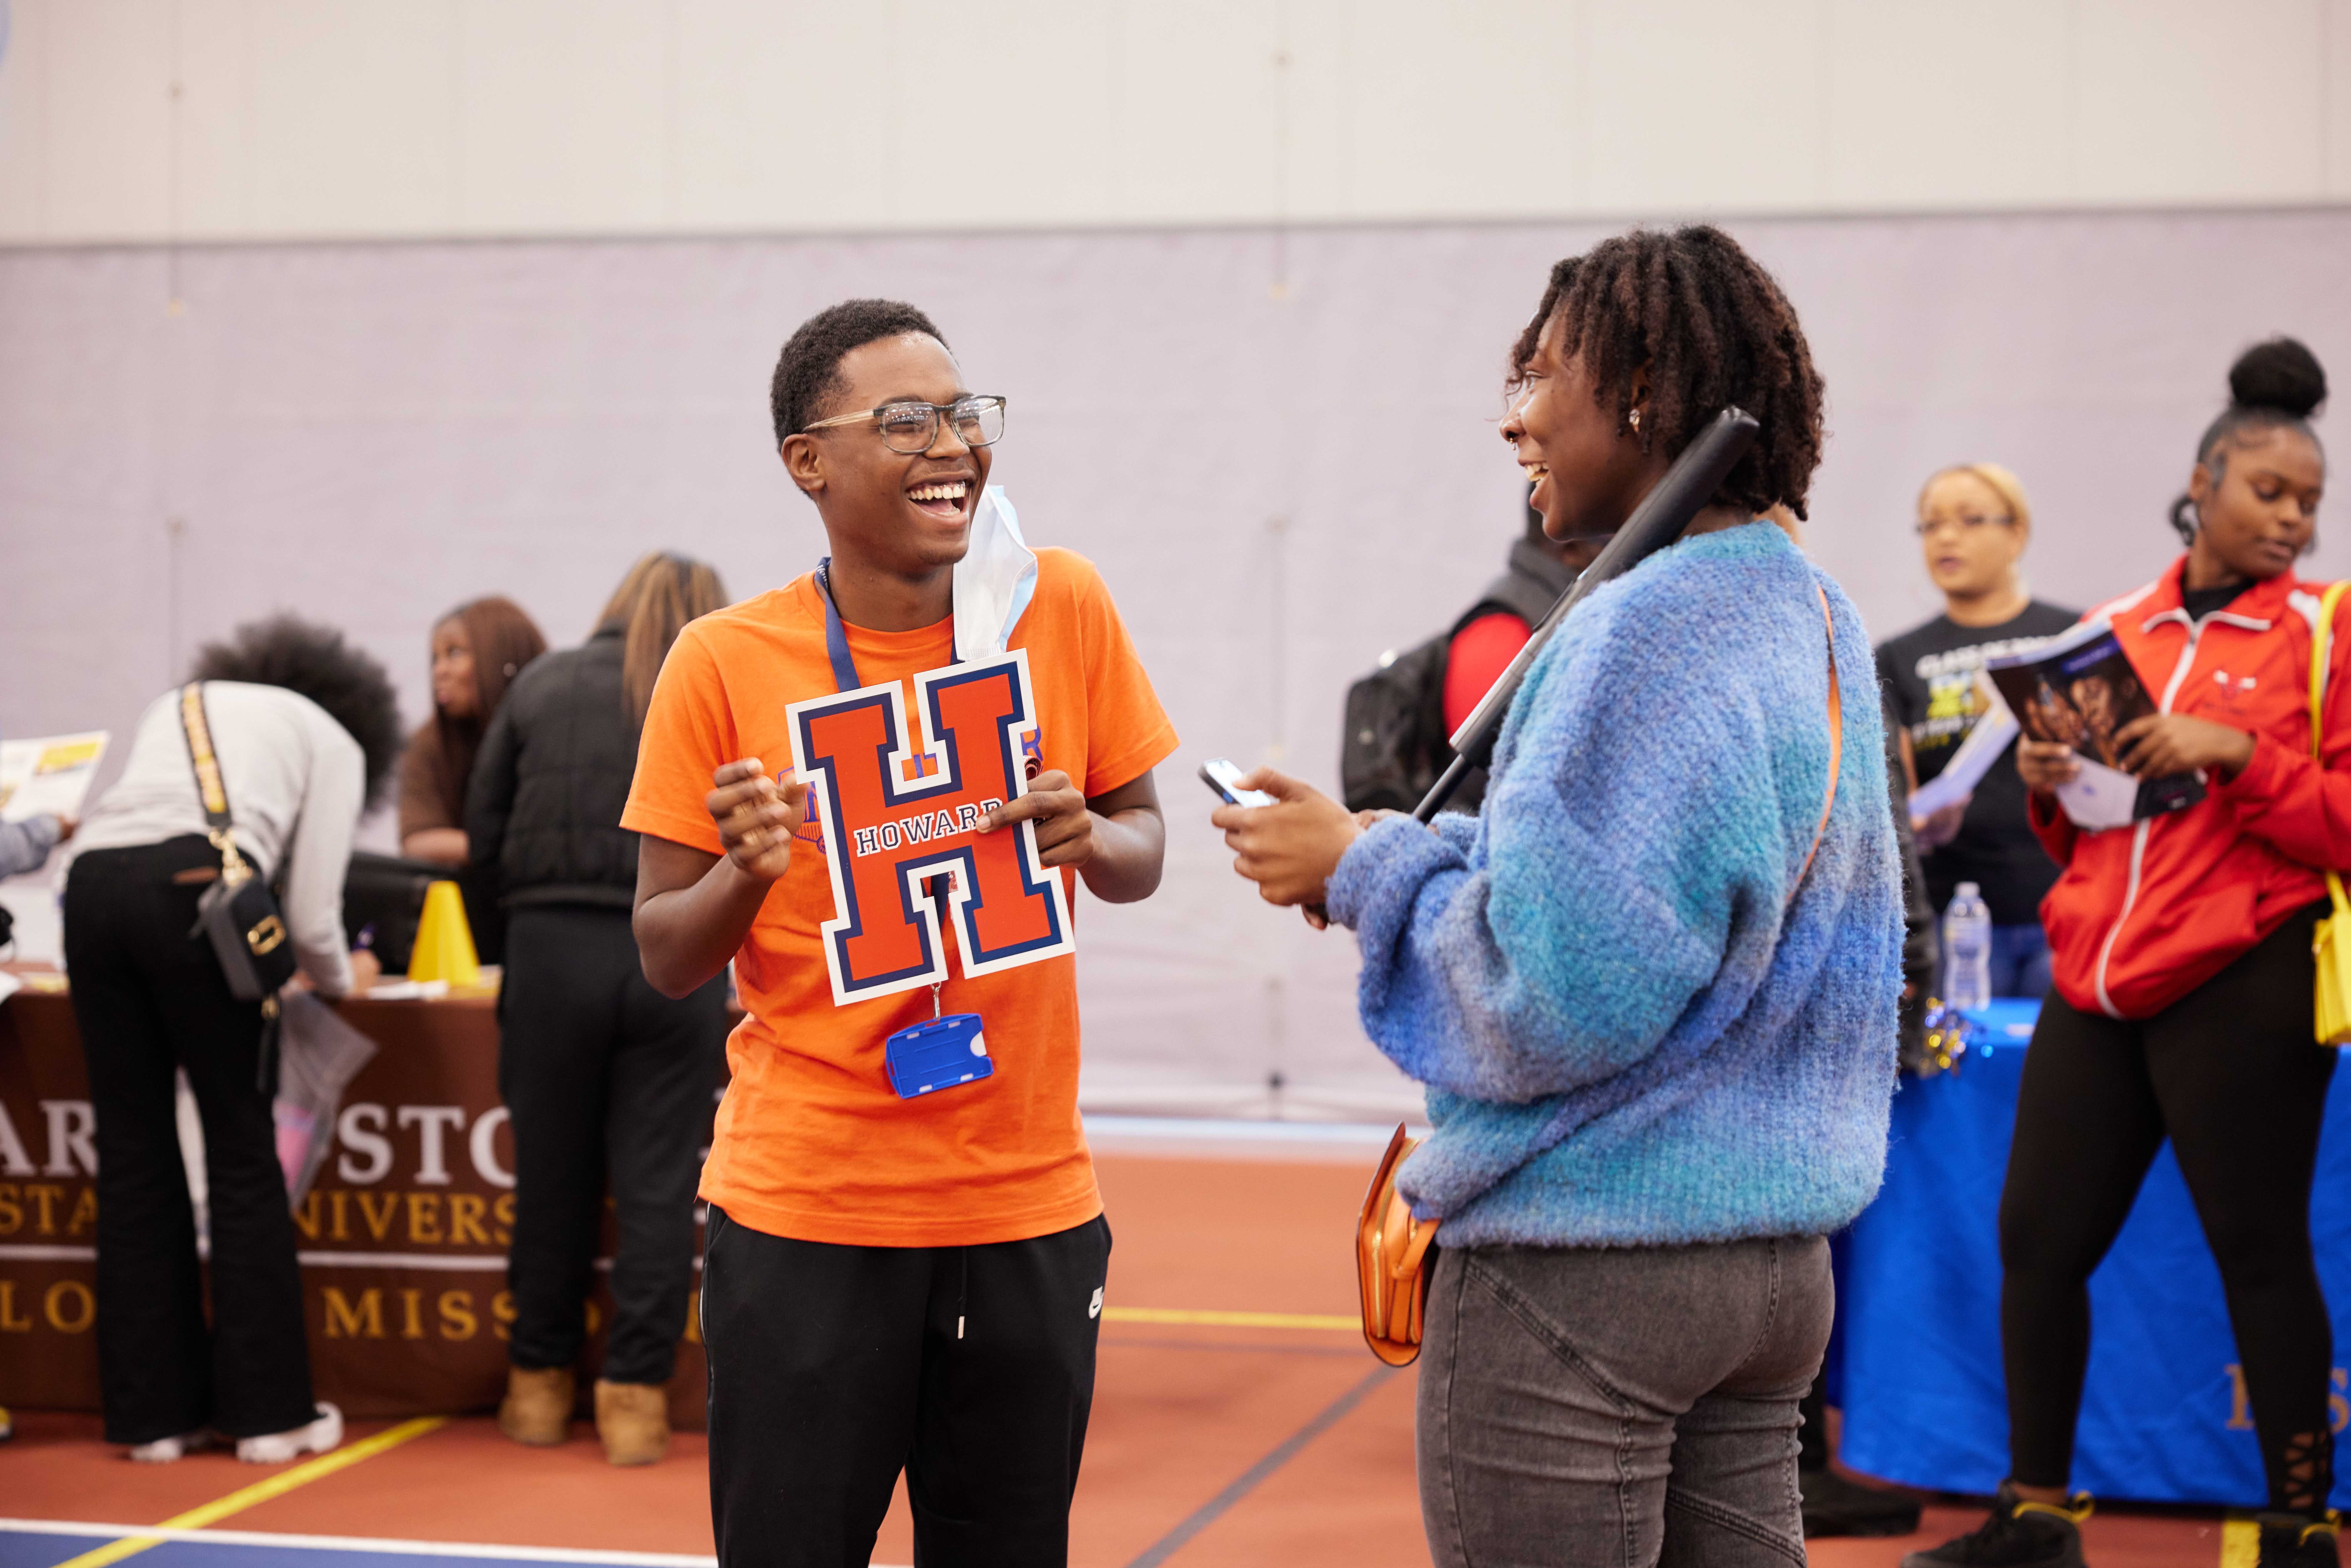 In this photo, you can see Antwan H, a senior at Butler College Prep and a young Black man, smiling and laughing as he talks with a Butler alum at the HBCU College Fair. He is holding a big Howard University decal in his hands. Behind him and the alum, you can see other students and college representatives at the fair.